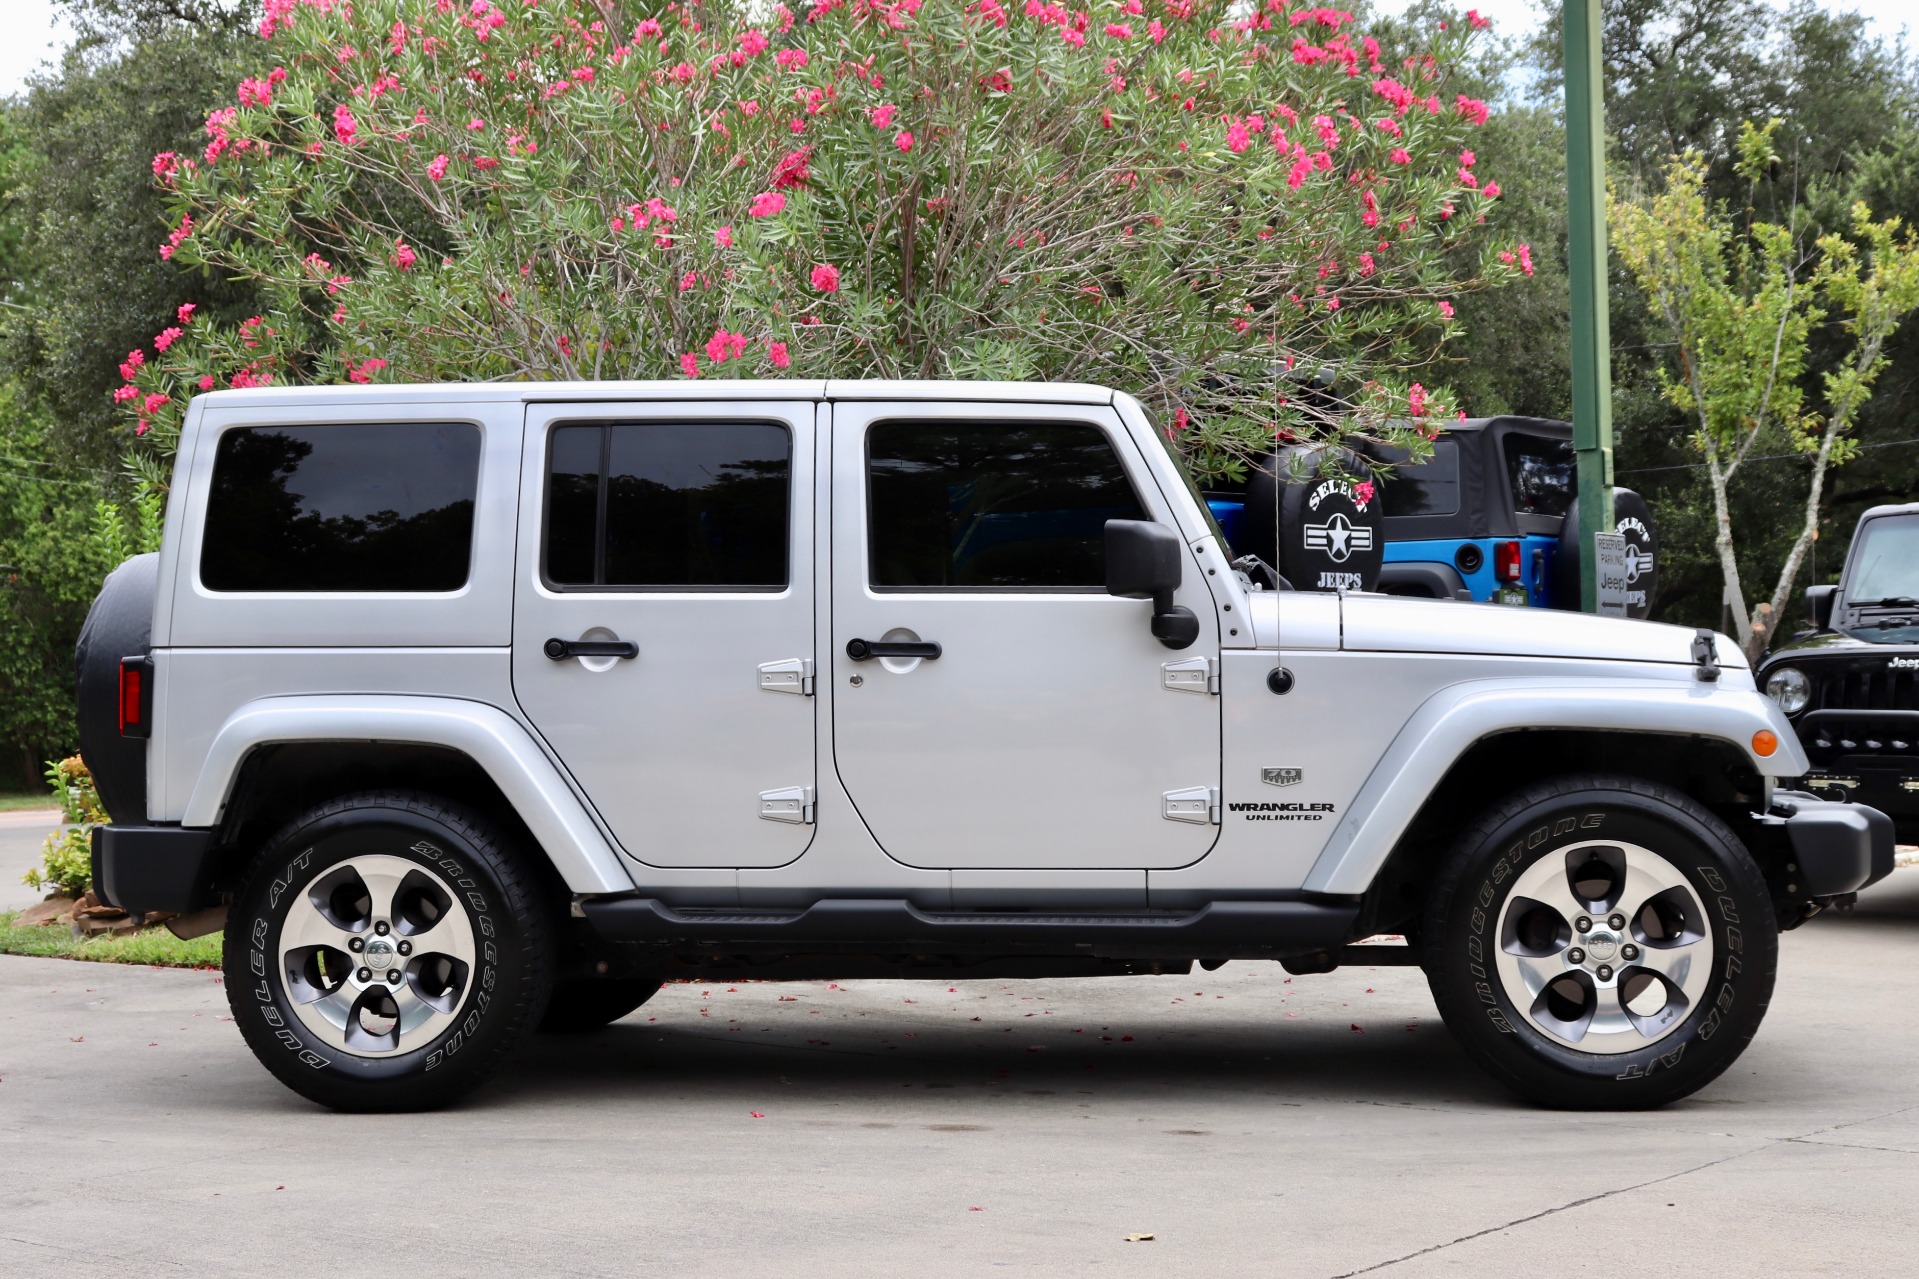 Used-2011-Jeep-Wrangler-Unlimited-4WD-4dr-70th-Anniversary-*Ltd-Avail*